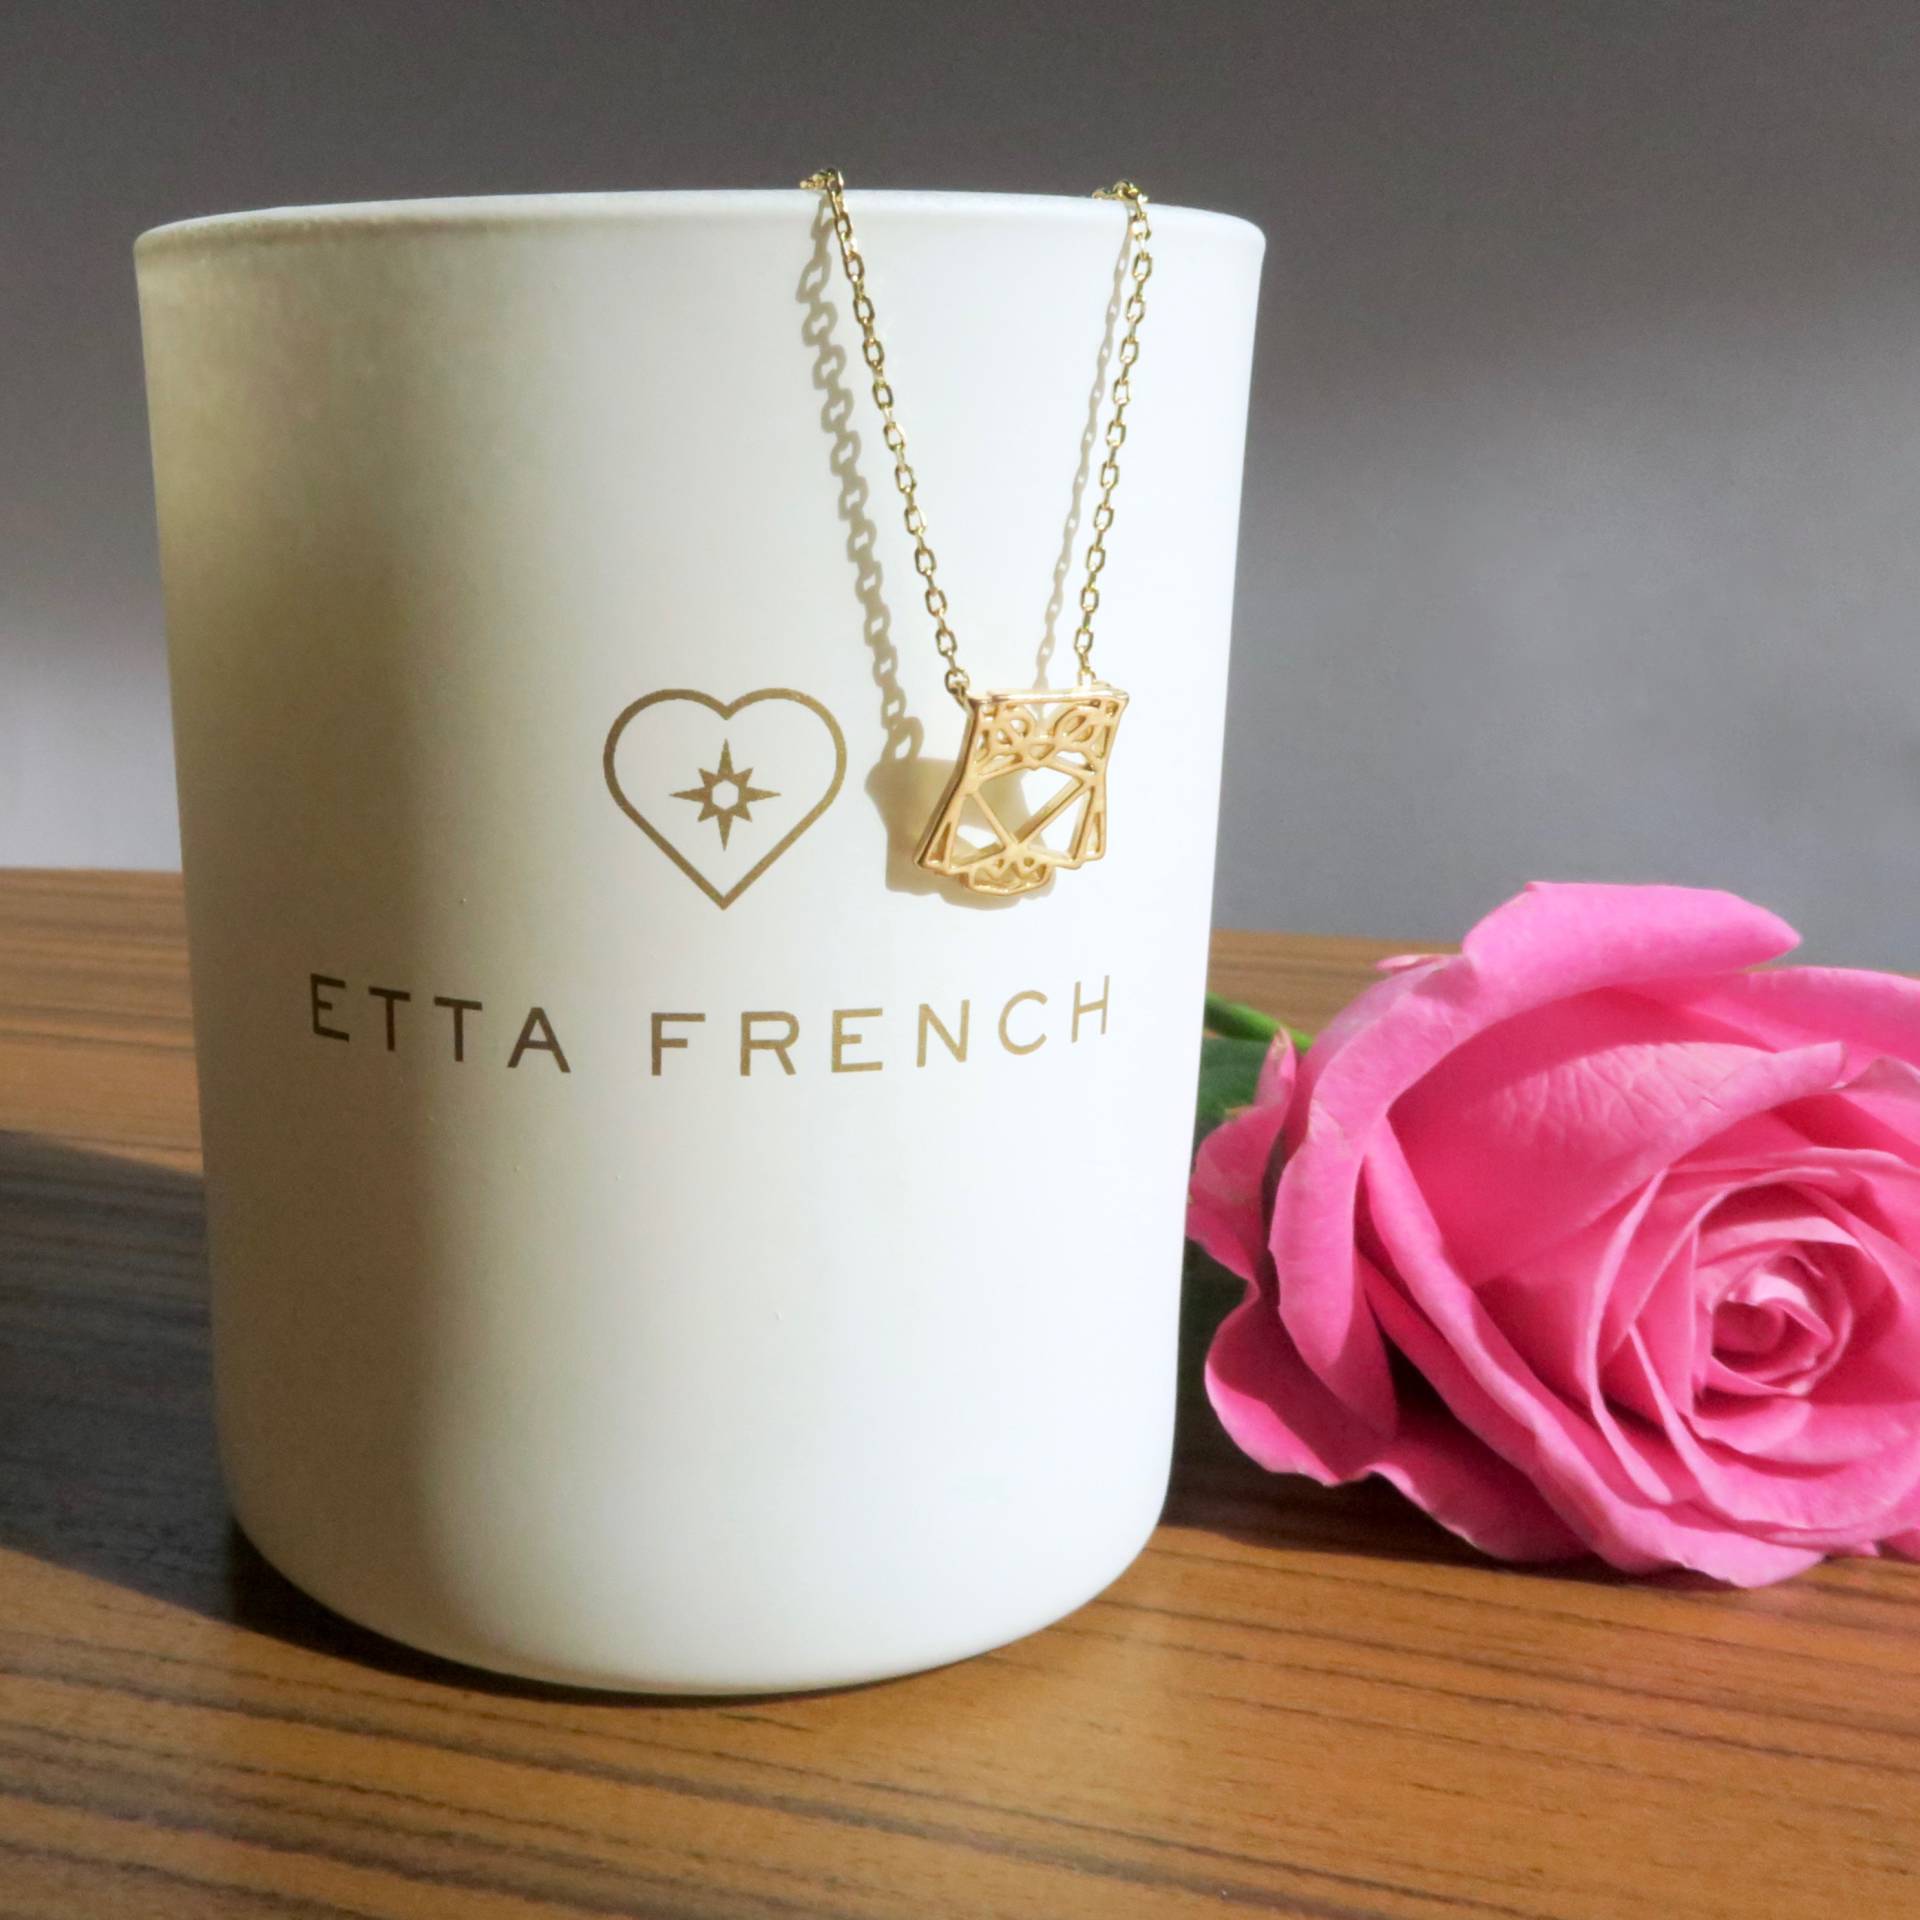 Etta French Jewellery Candles